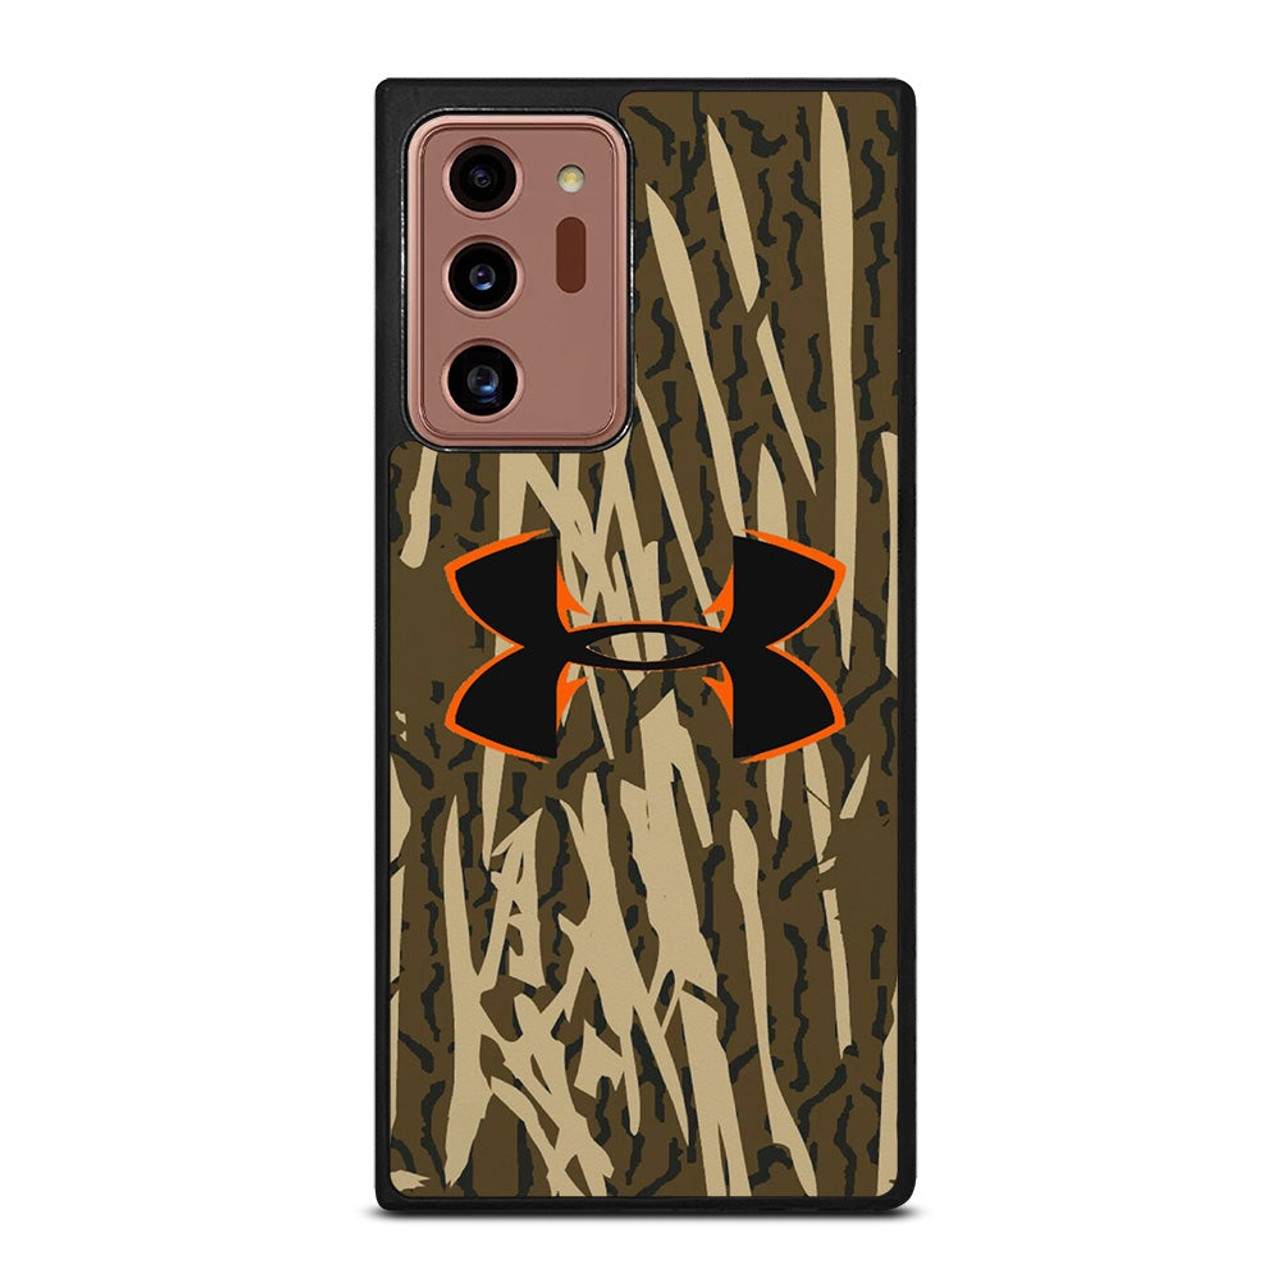 UNDER ARMOUR FISHING ART Samsung Galaxy Note 20 Ultra Case Cover